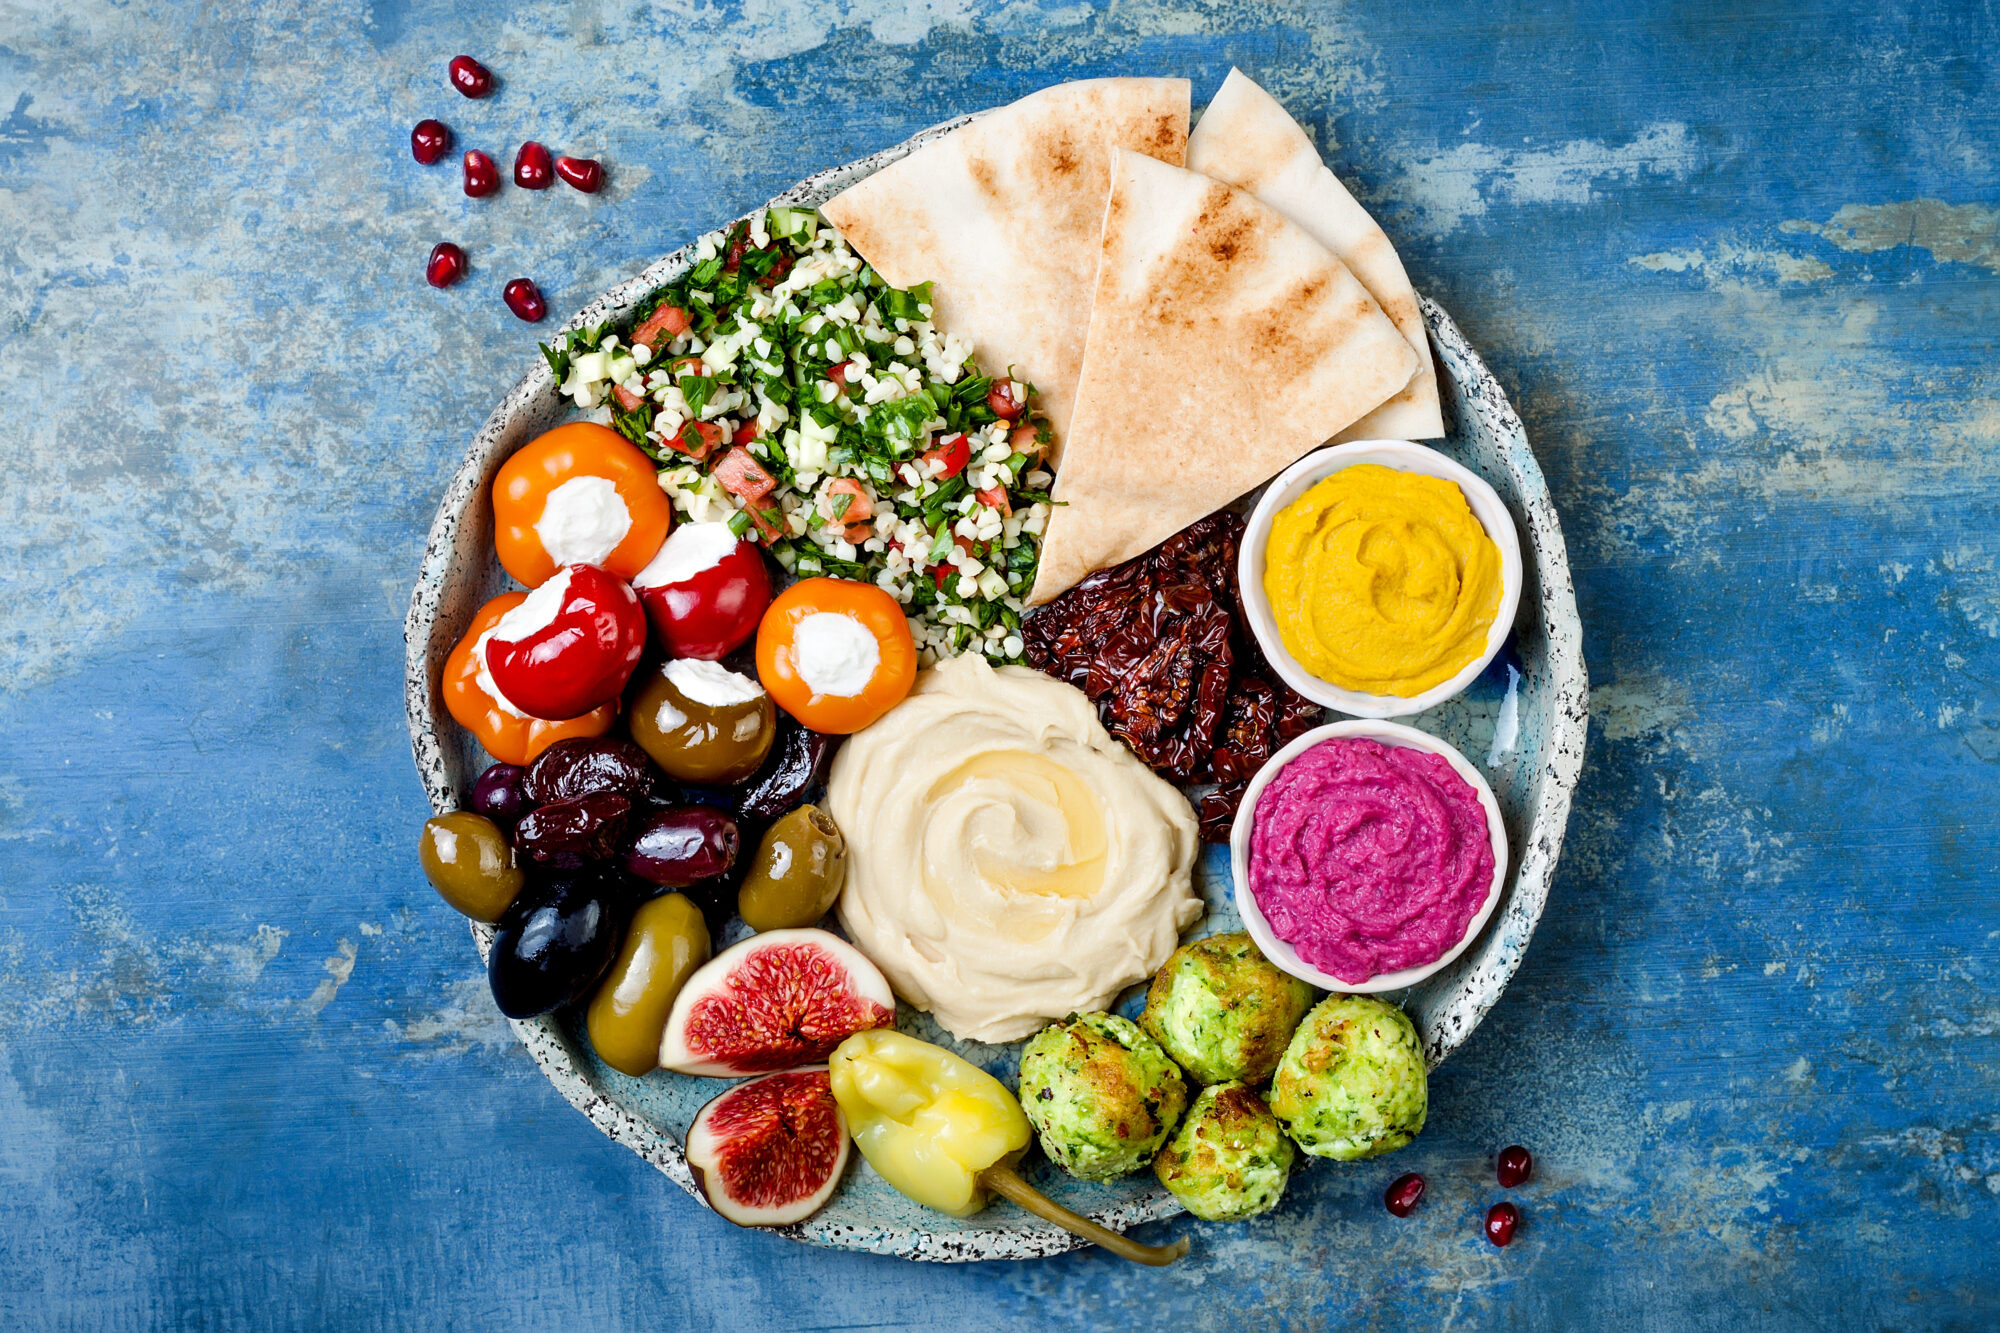 A Middle Eastern meze platter viewed from above, set on a blue table, with figs, dates, stuffed cherry tomatoes, hummus, pita bread, tabouleh, and more.